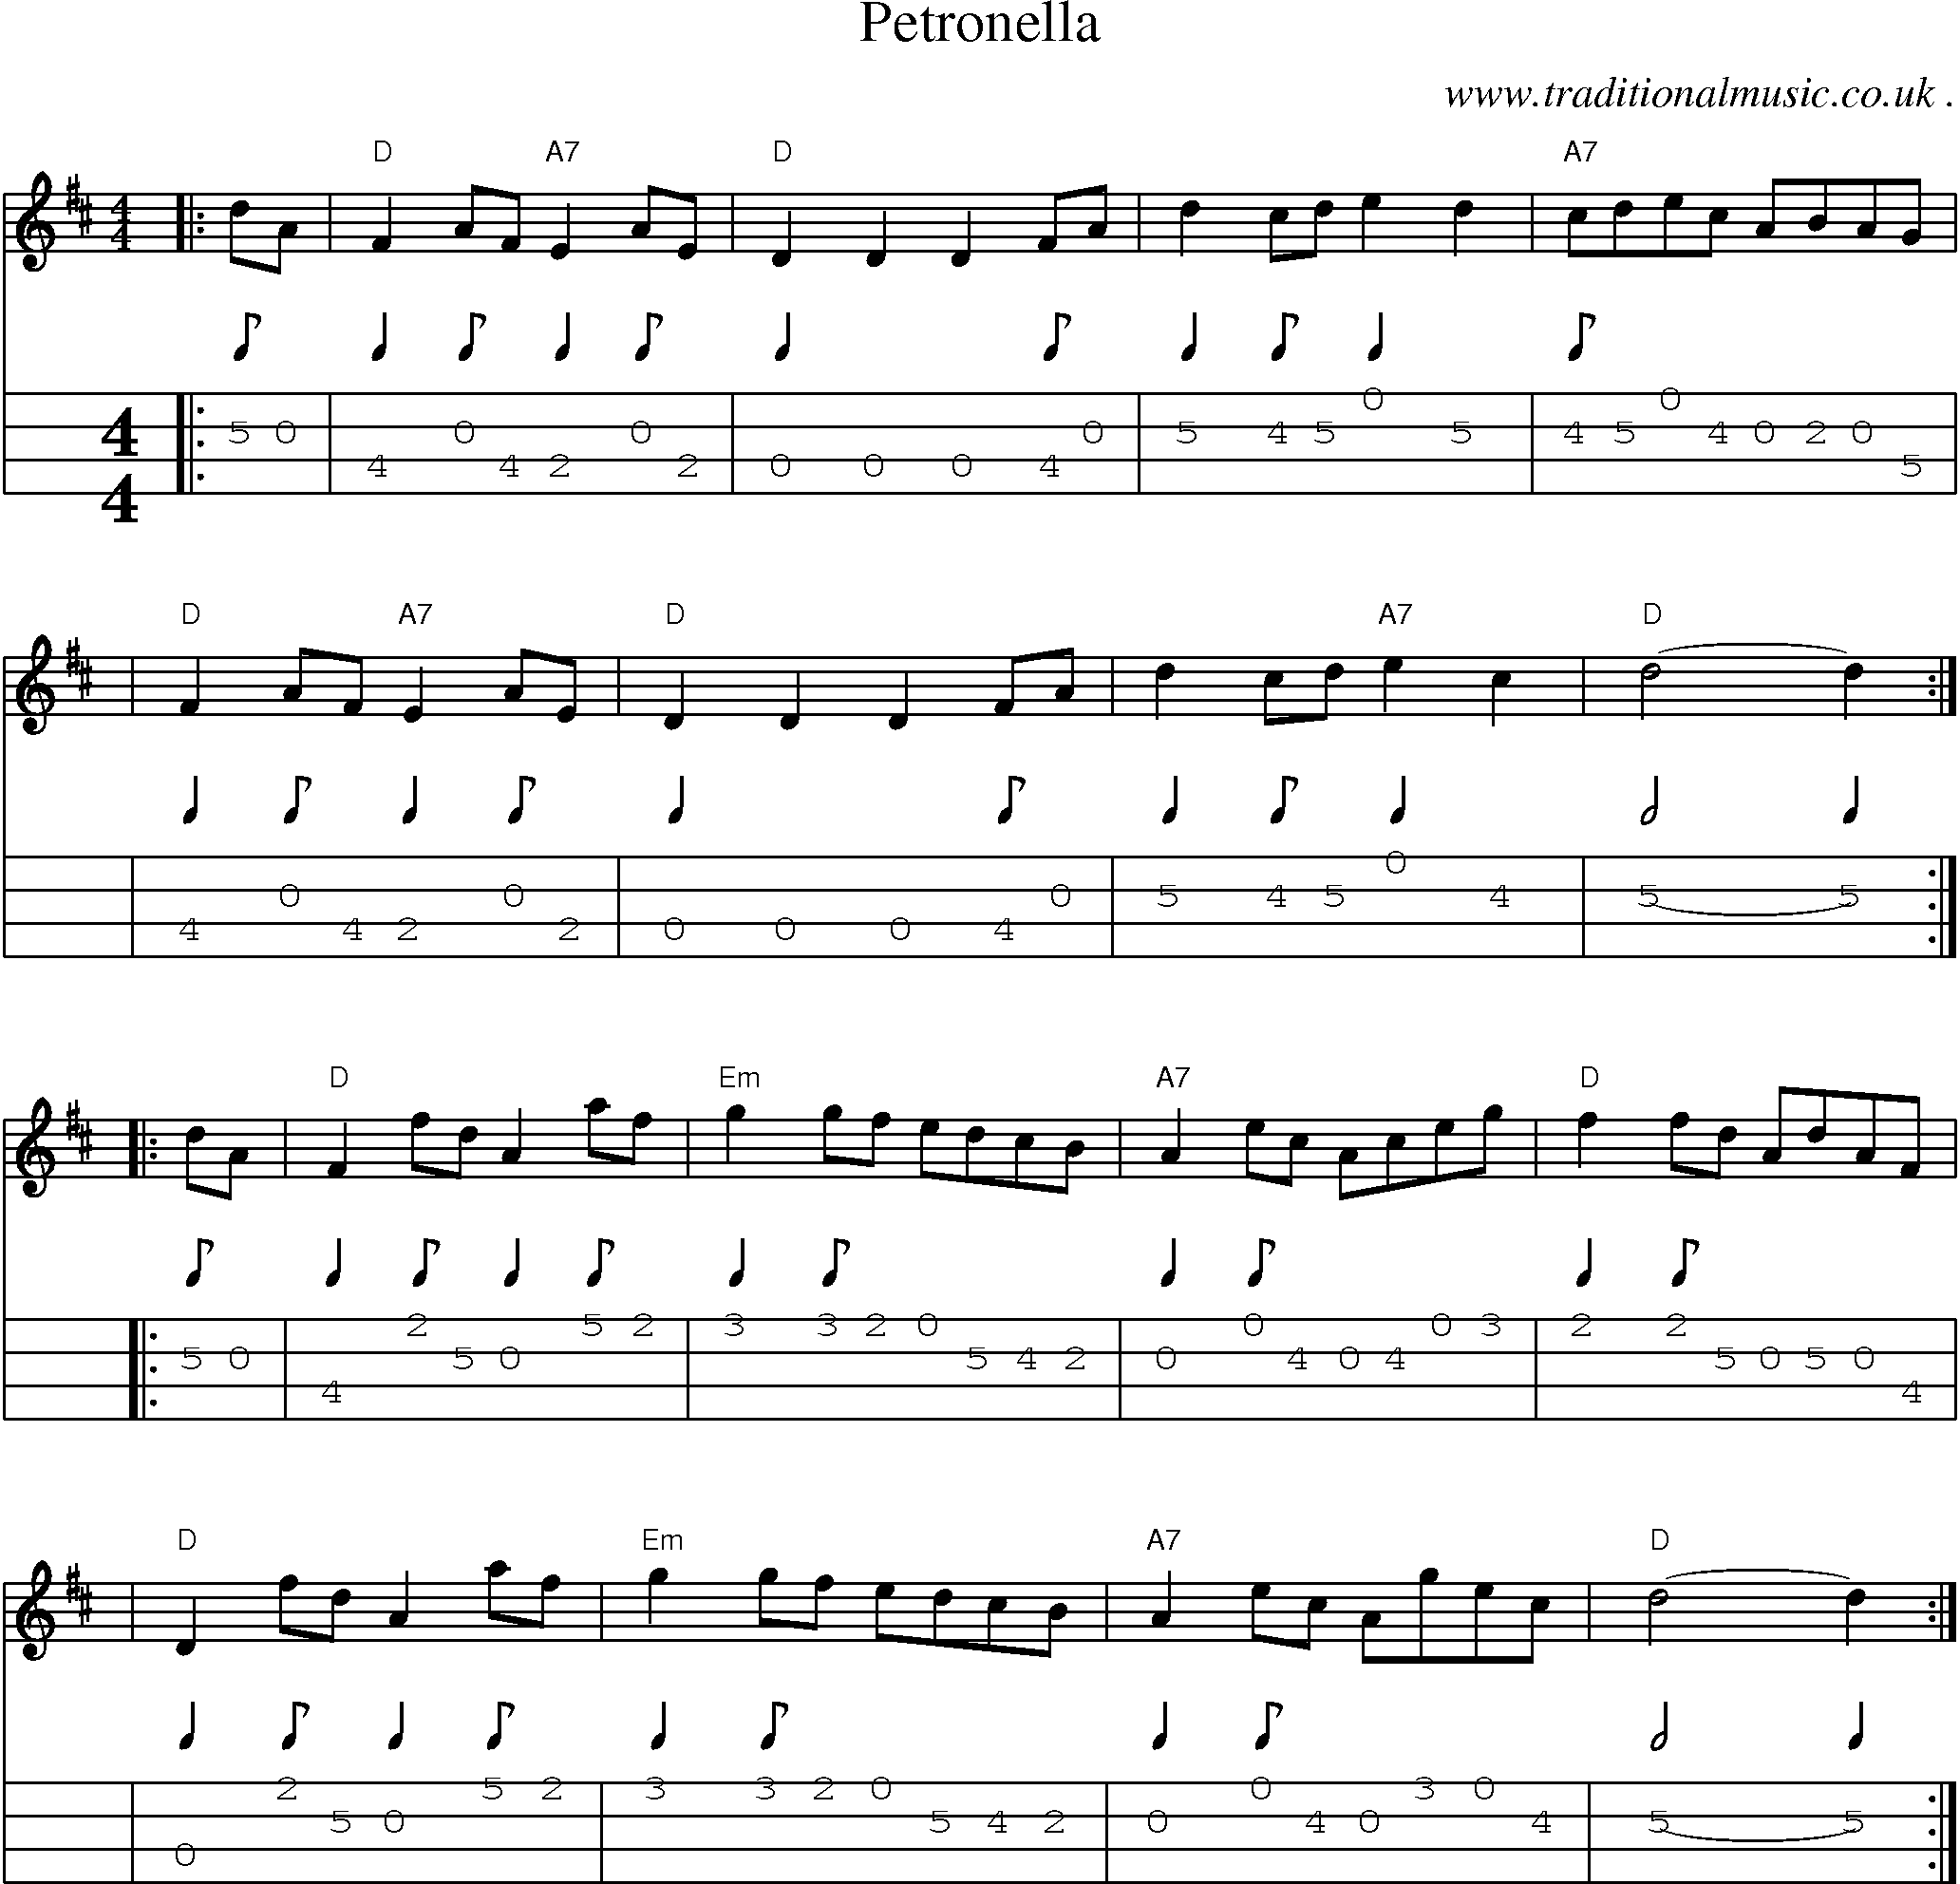 Sheet-music  score, Chords and Mandolin Tabs for Petronella